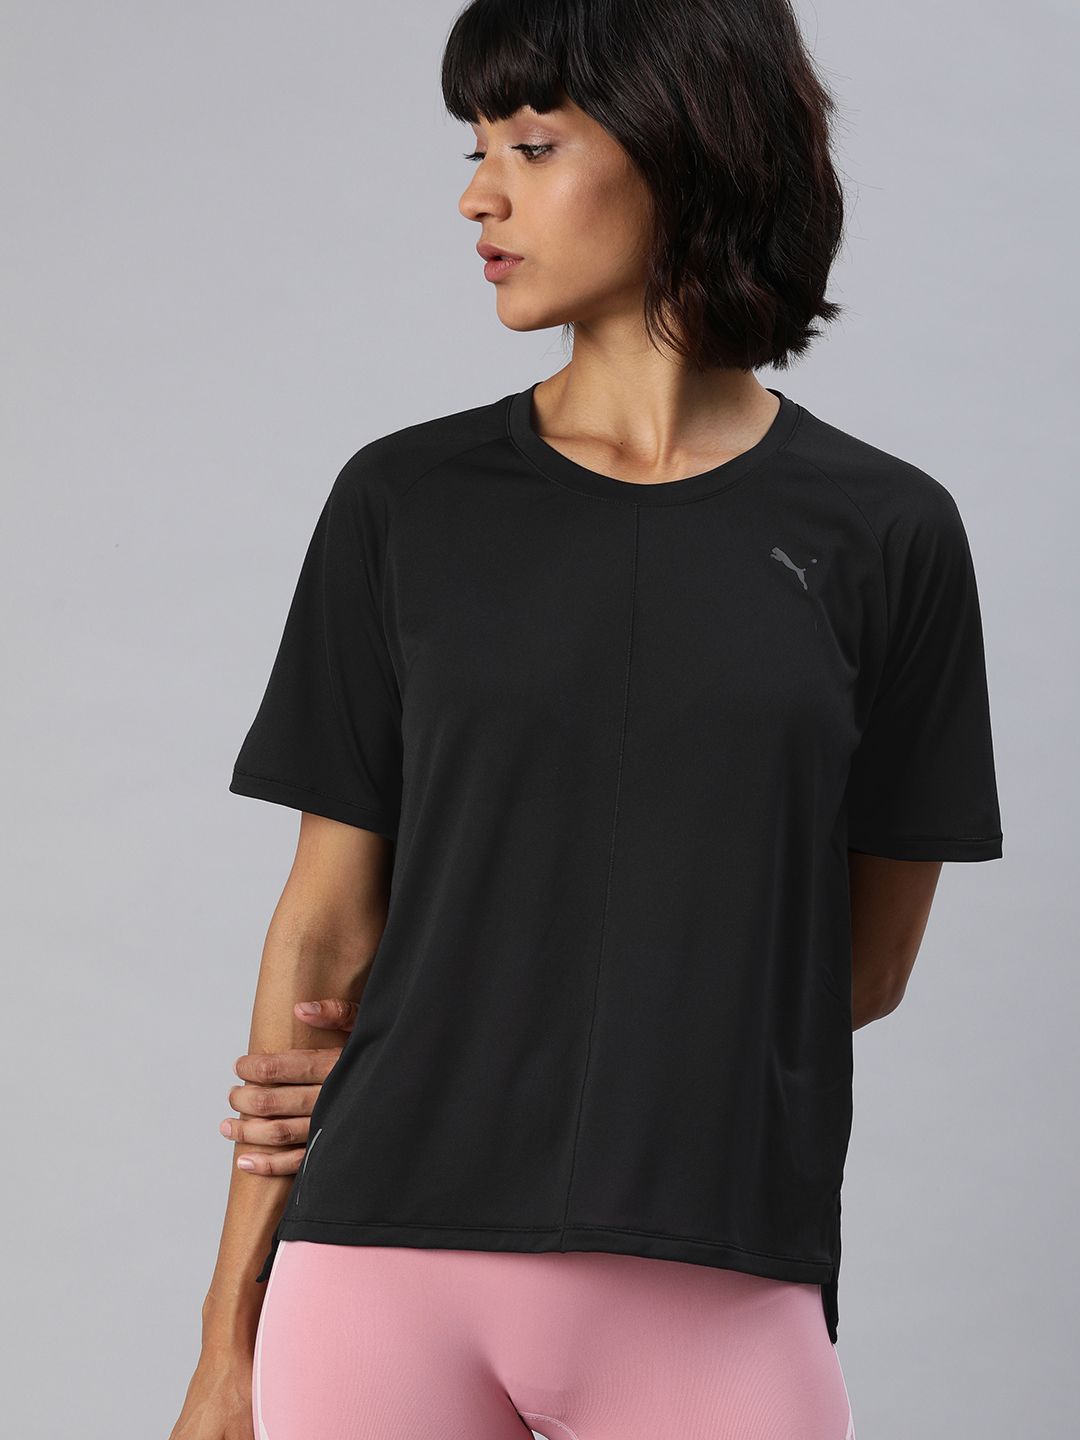 Puma Women Black Solid Relaxed Fit DryCell Round Neck  Yoga T-shirt Price in India